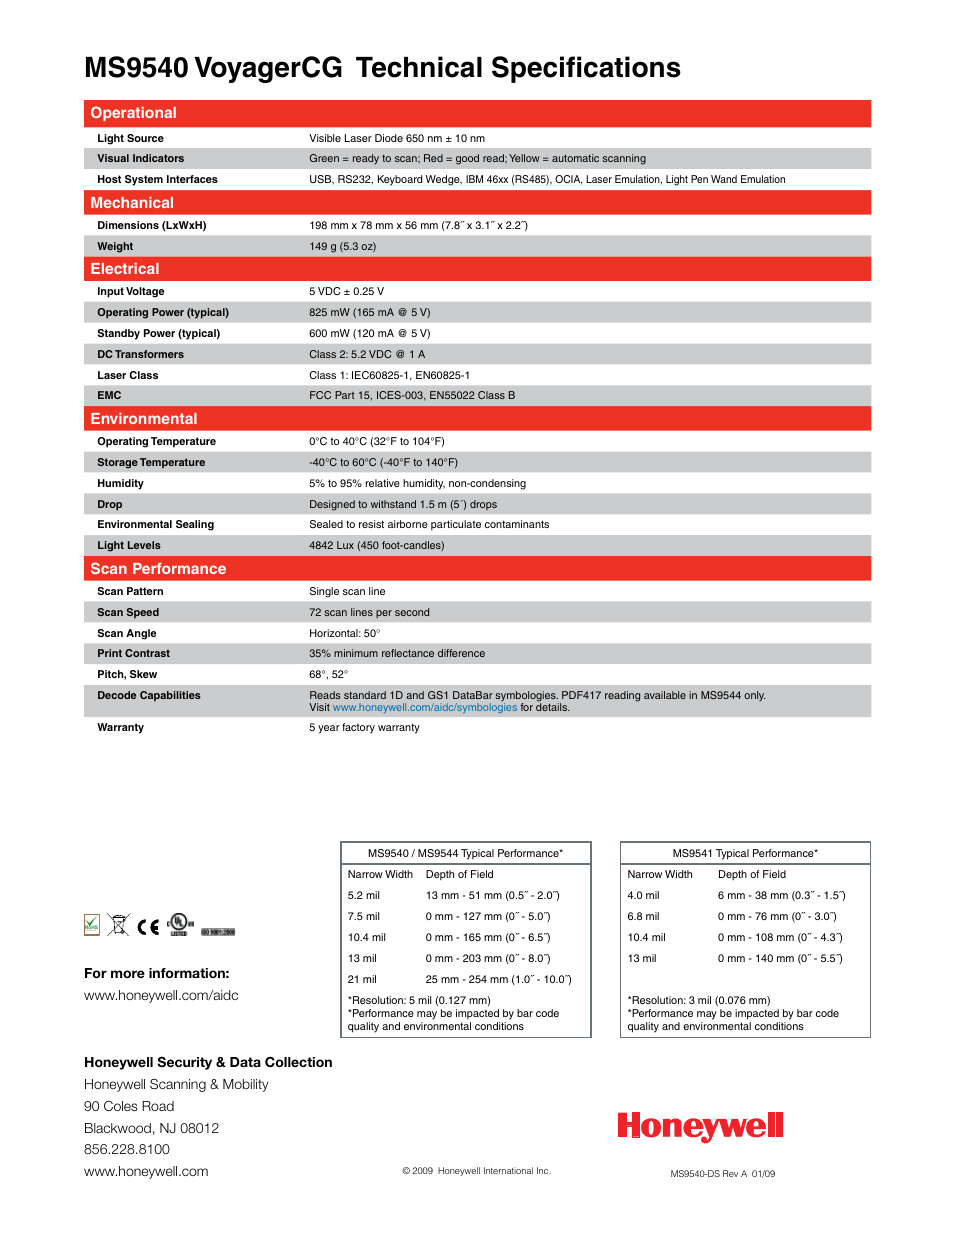 Ms9540 voyagercg technical specifications, Operational, Mechanical